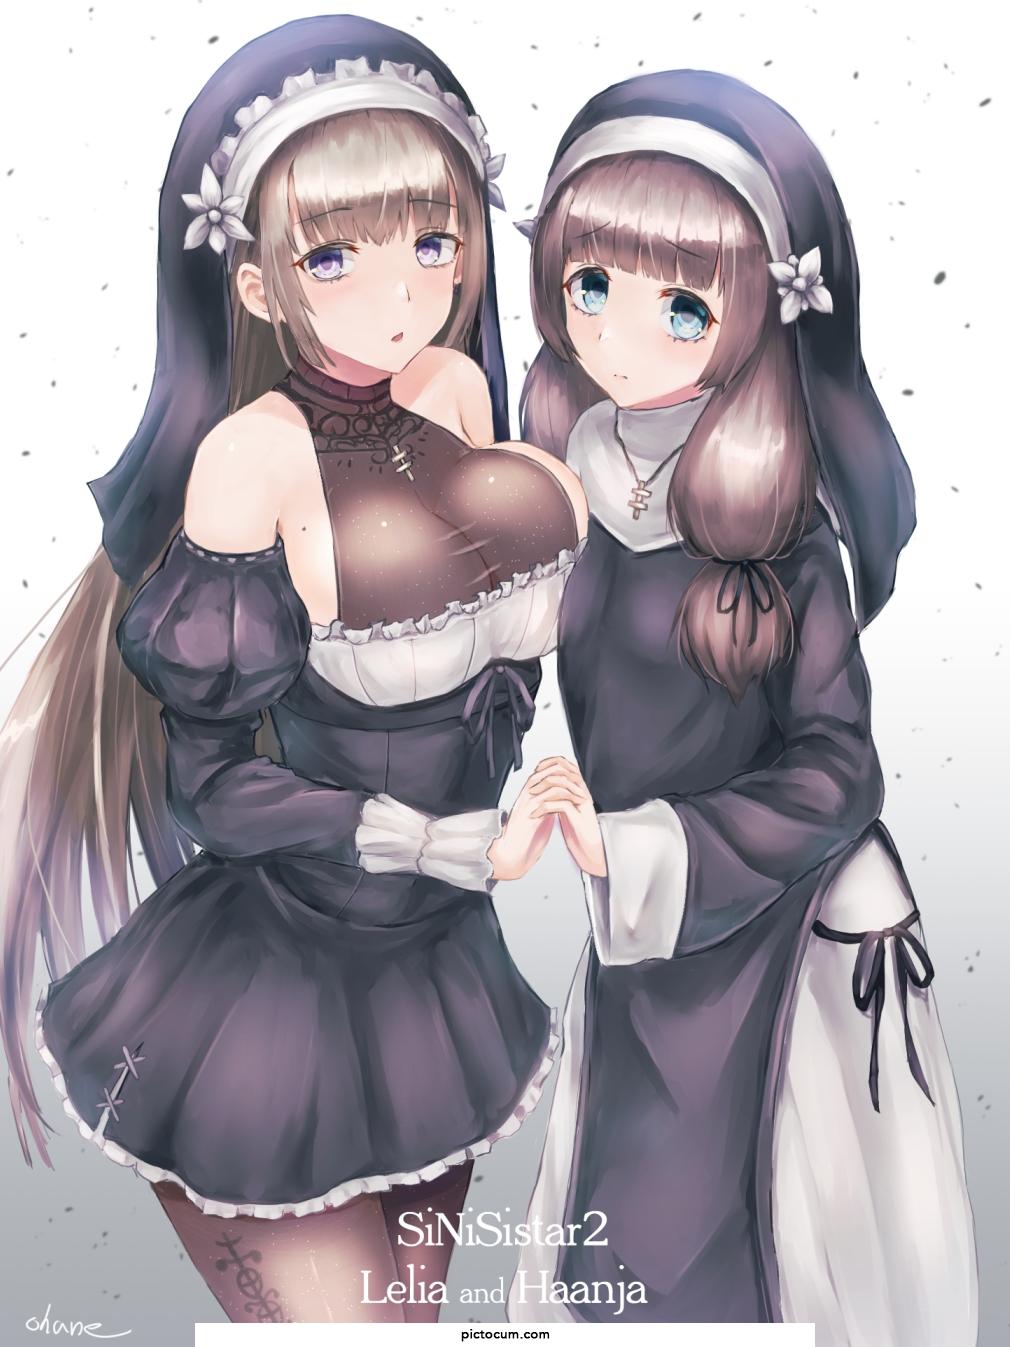 Lelia and Haanja Nuns Taking Comfort In One Another